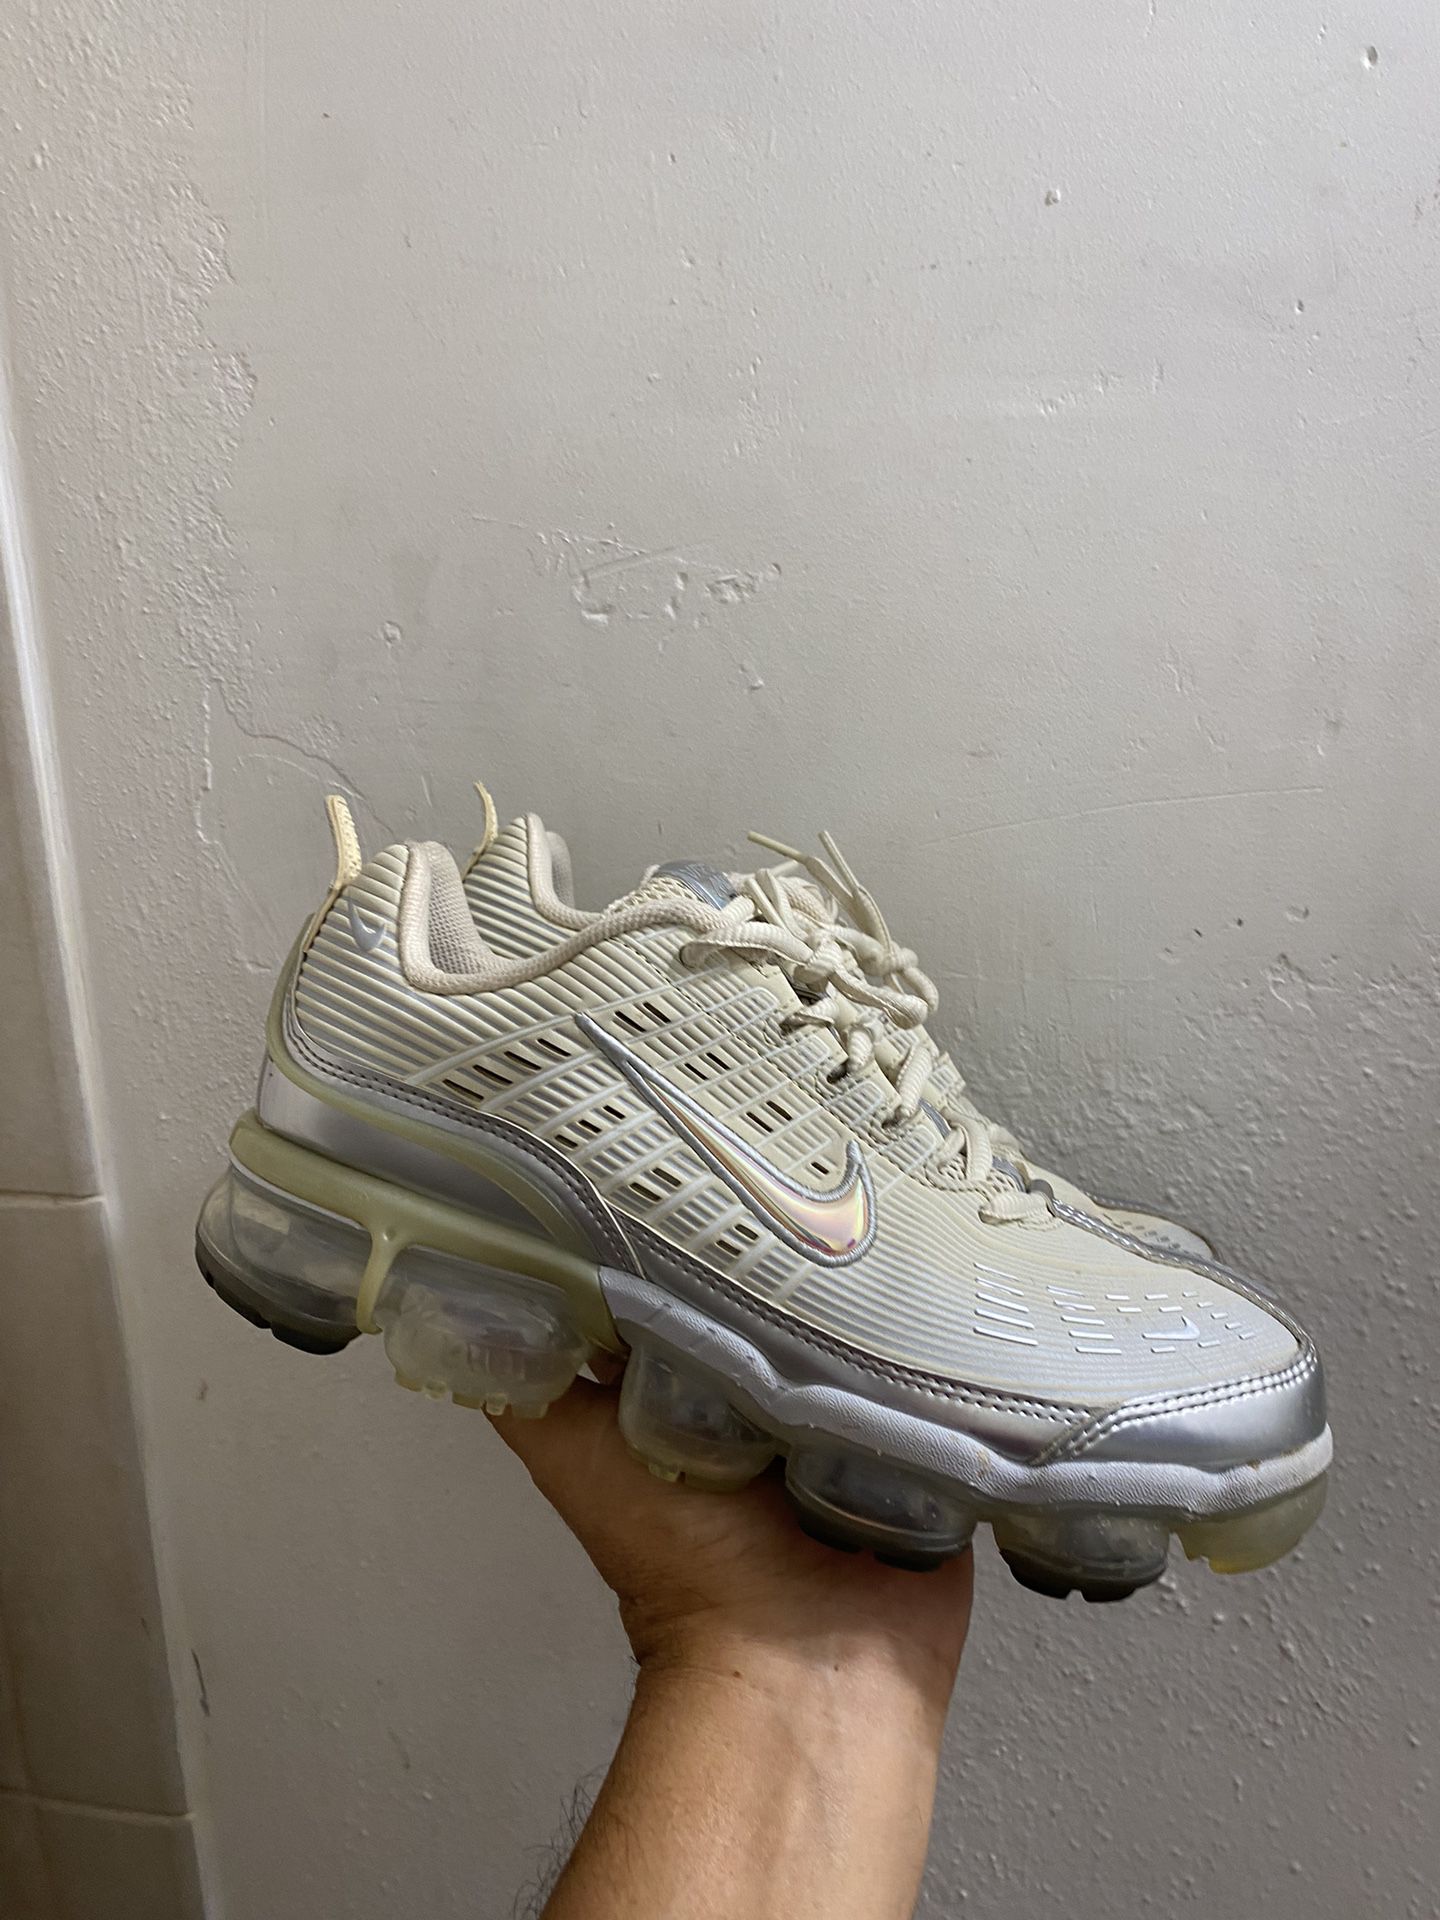 NIKE AIR VAPORMAX 360 Met Silver Trainers Size 10 women's Authentic Sale in Houston, - OfferUp